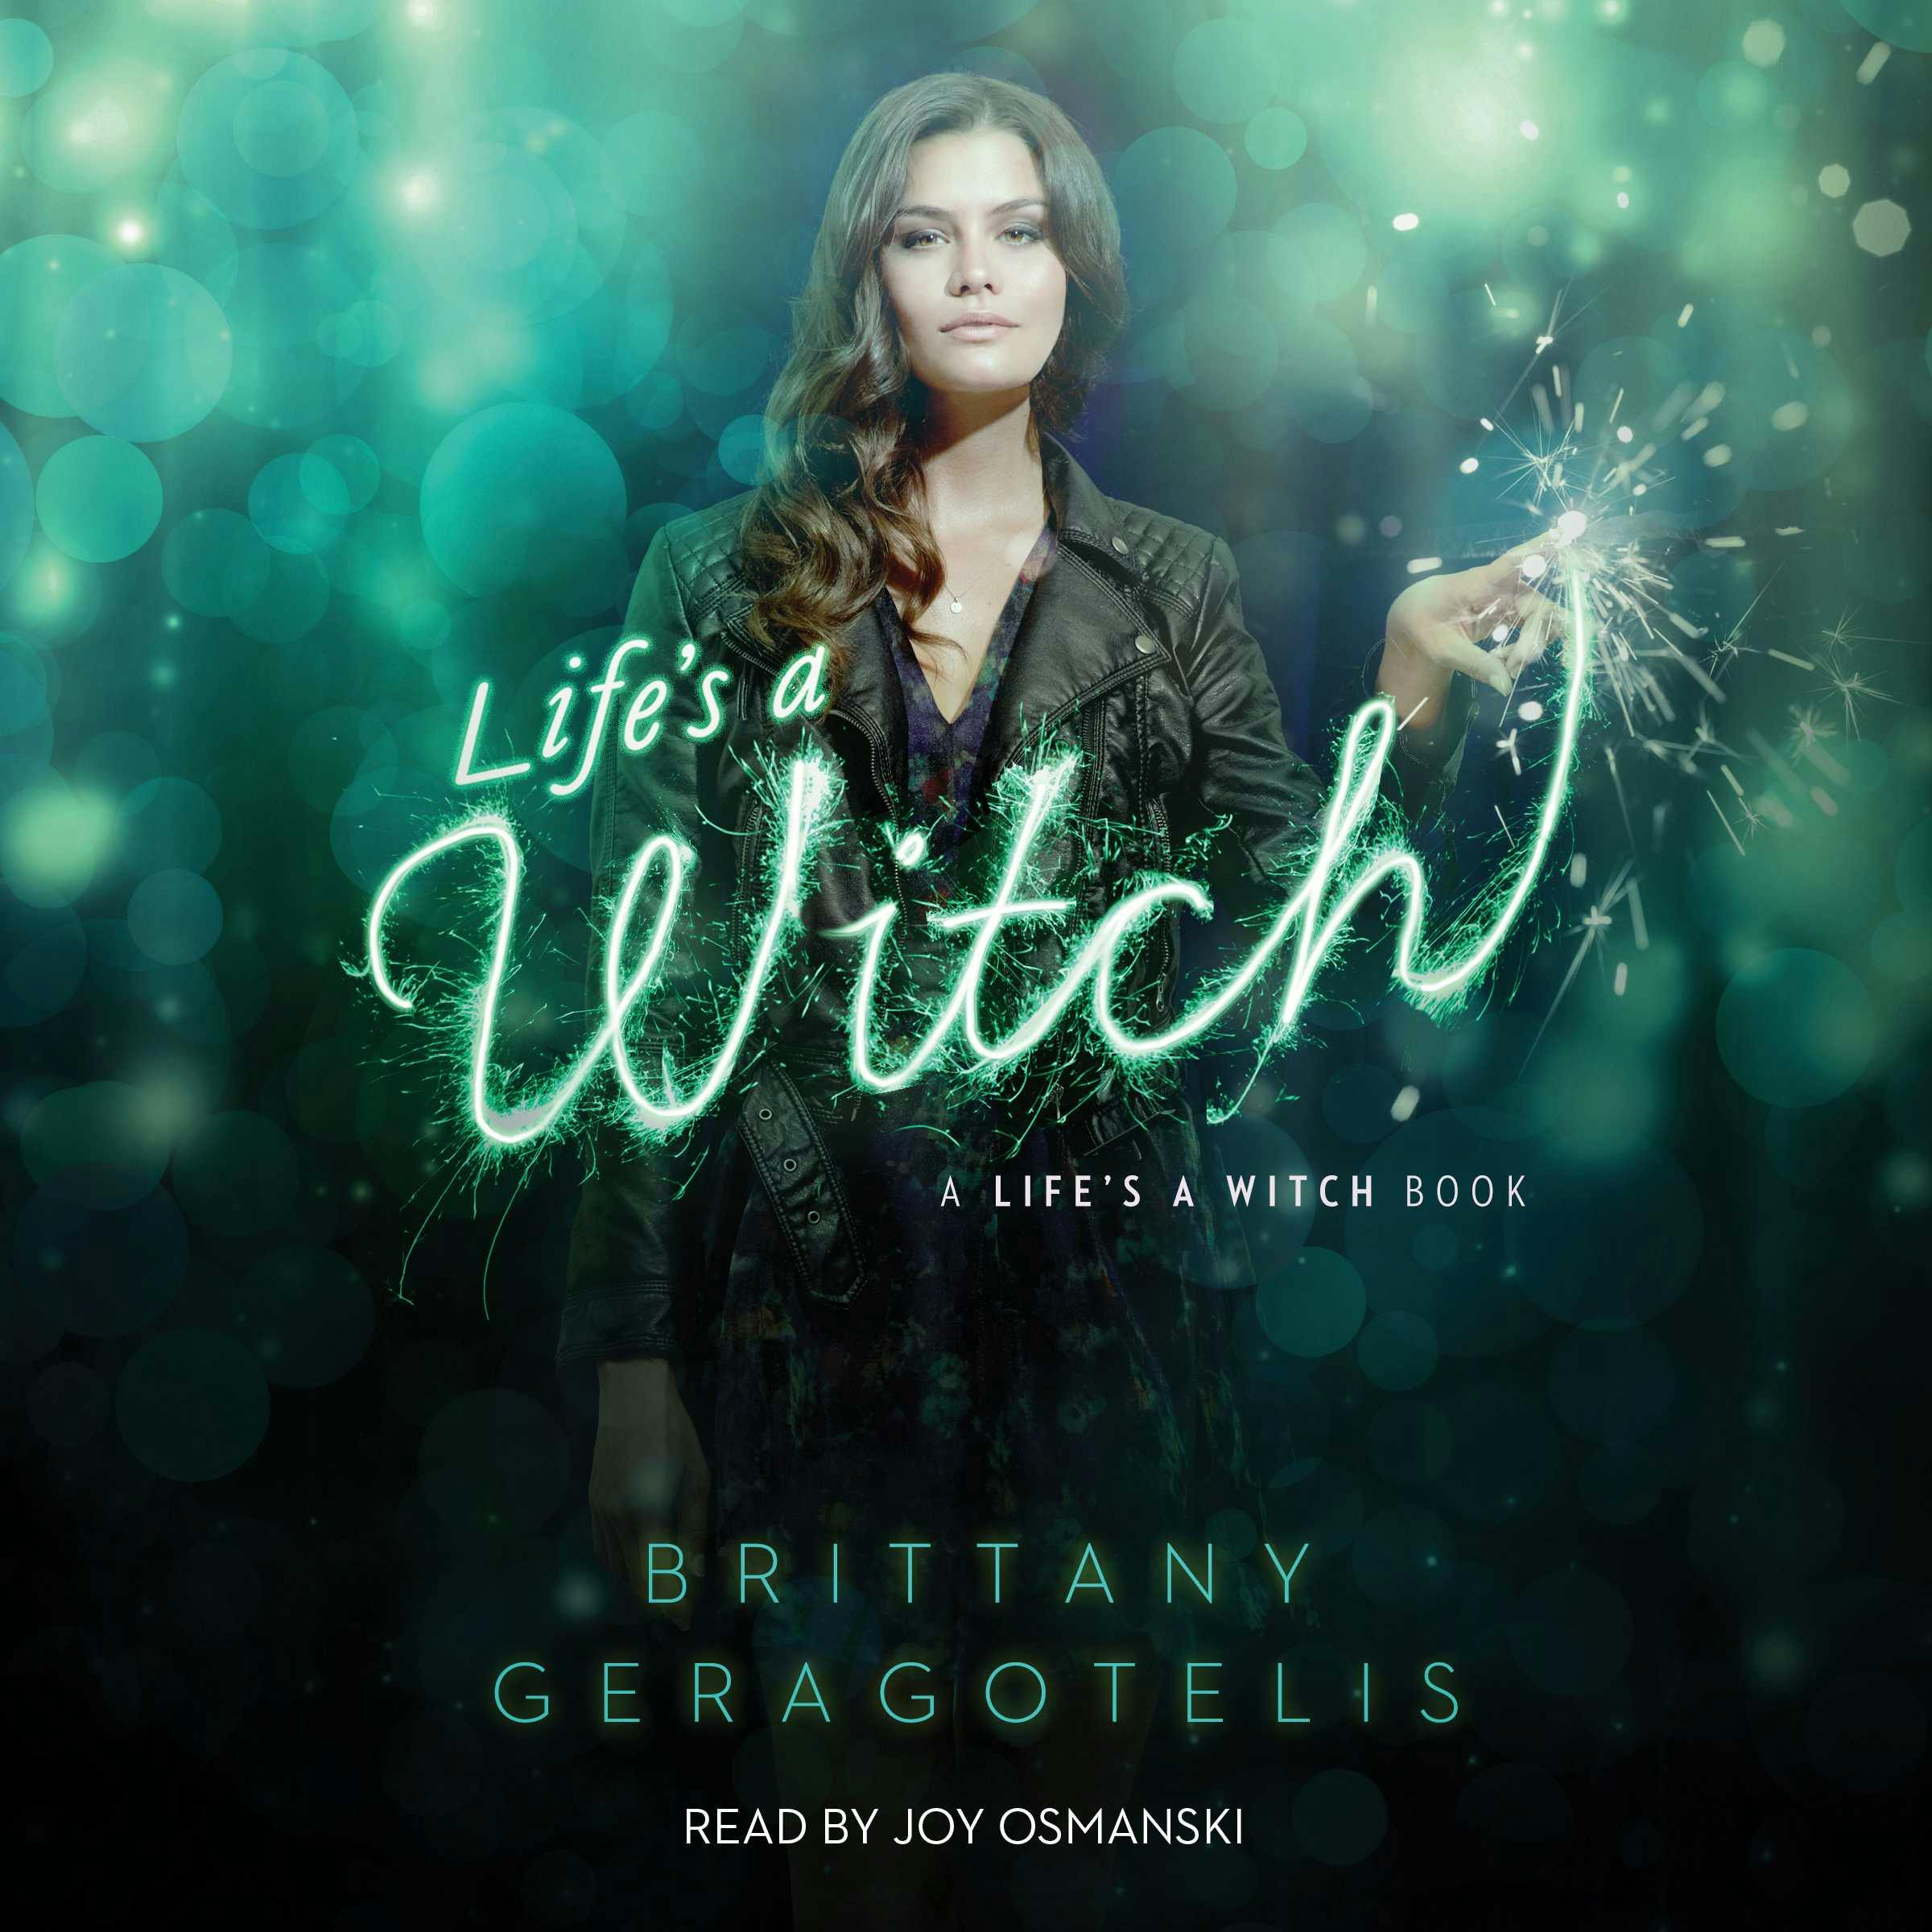 Life's a Witch - Brittany Geragotelis